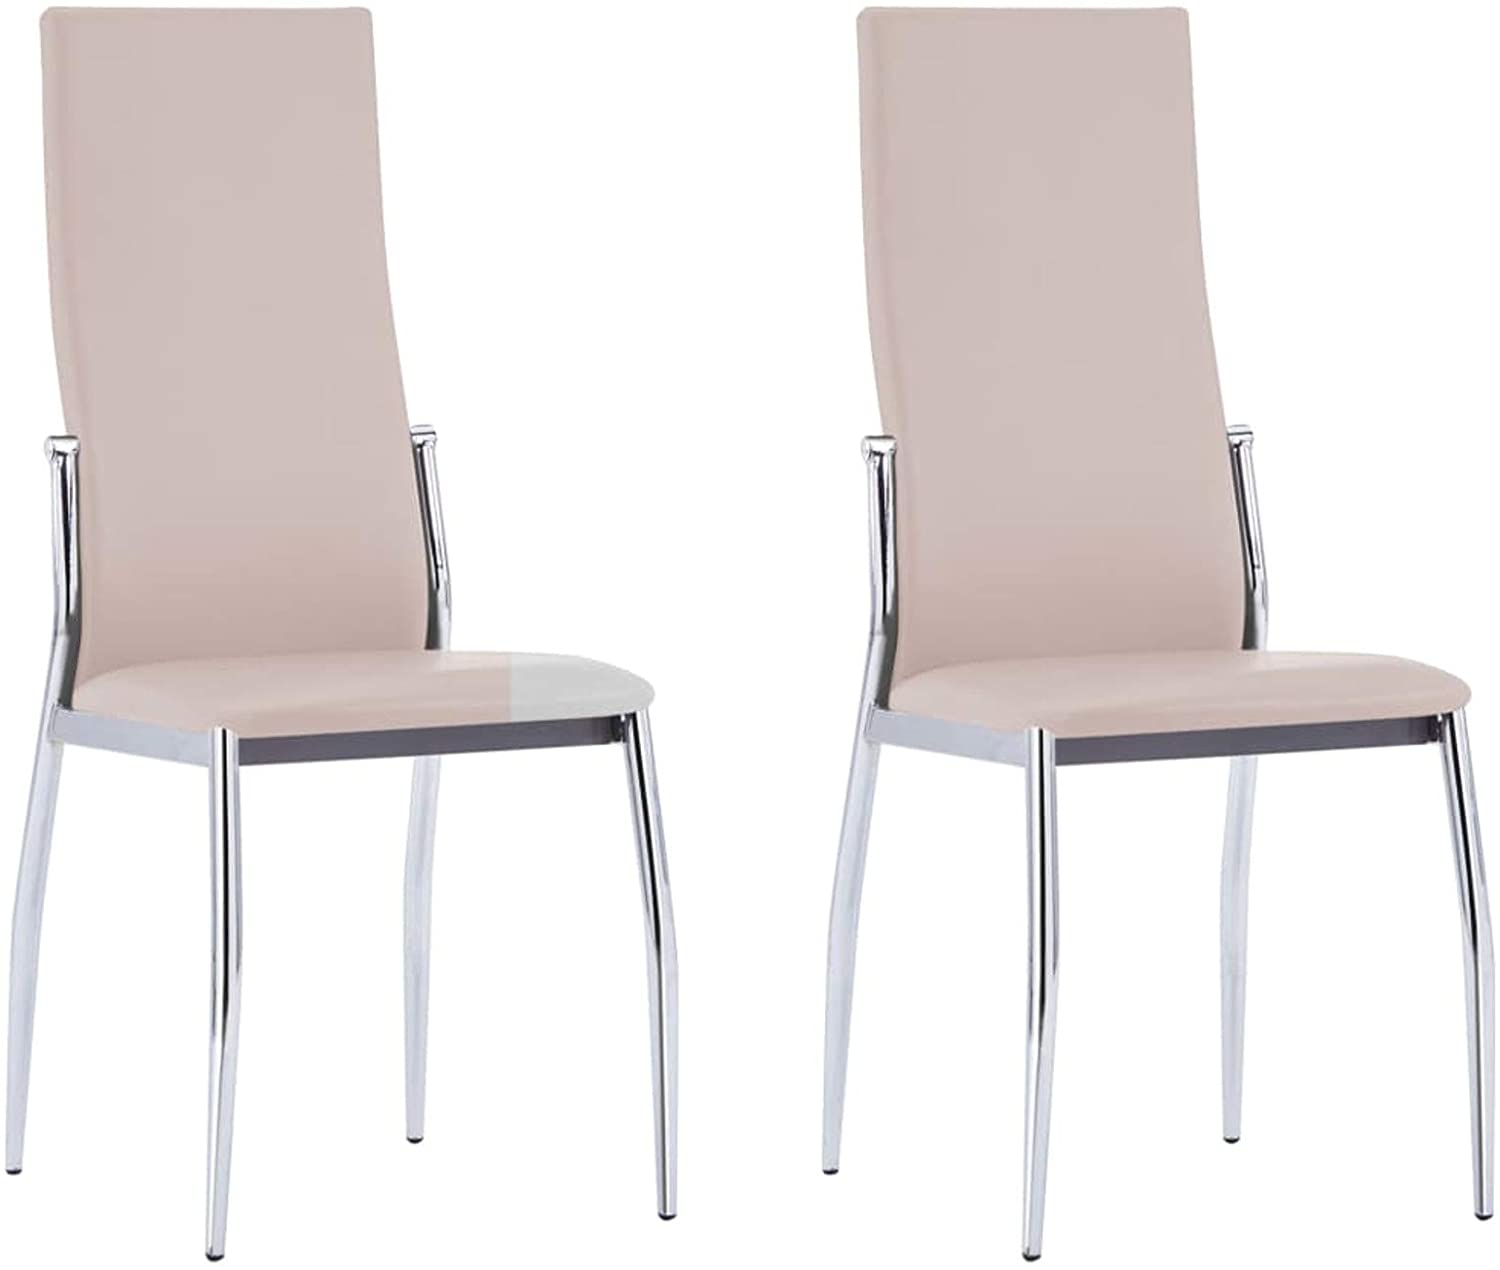 B08NTCKJF7 Tidyard 2 Piece Dining Chairs Faux Leather Upholstery Armless Side Chair with Metal Legs Cappuccino for Kitchen, Dining Room, Living Room Home Furniture 21.3 x 17 x 39.4 Inches (W x D x H)